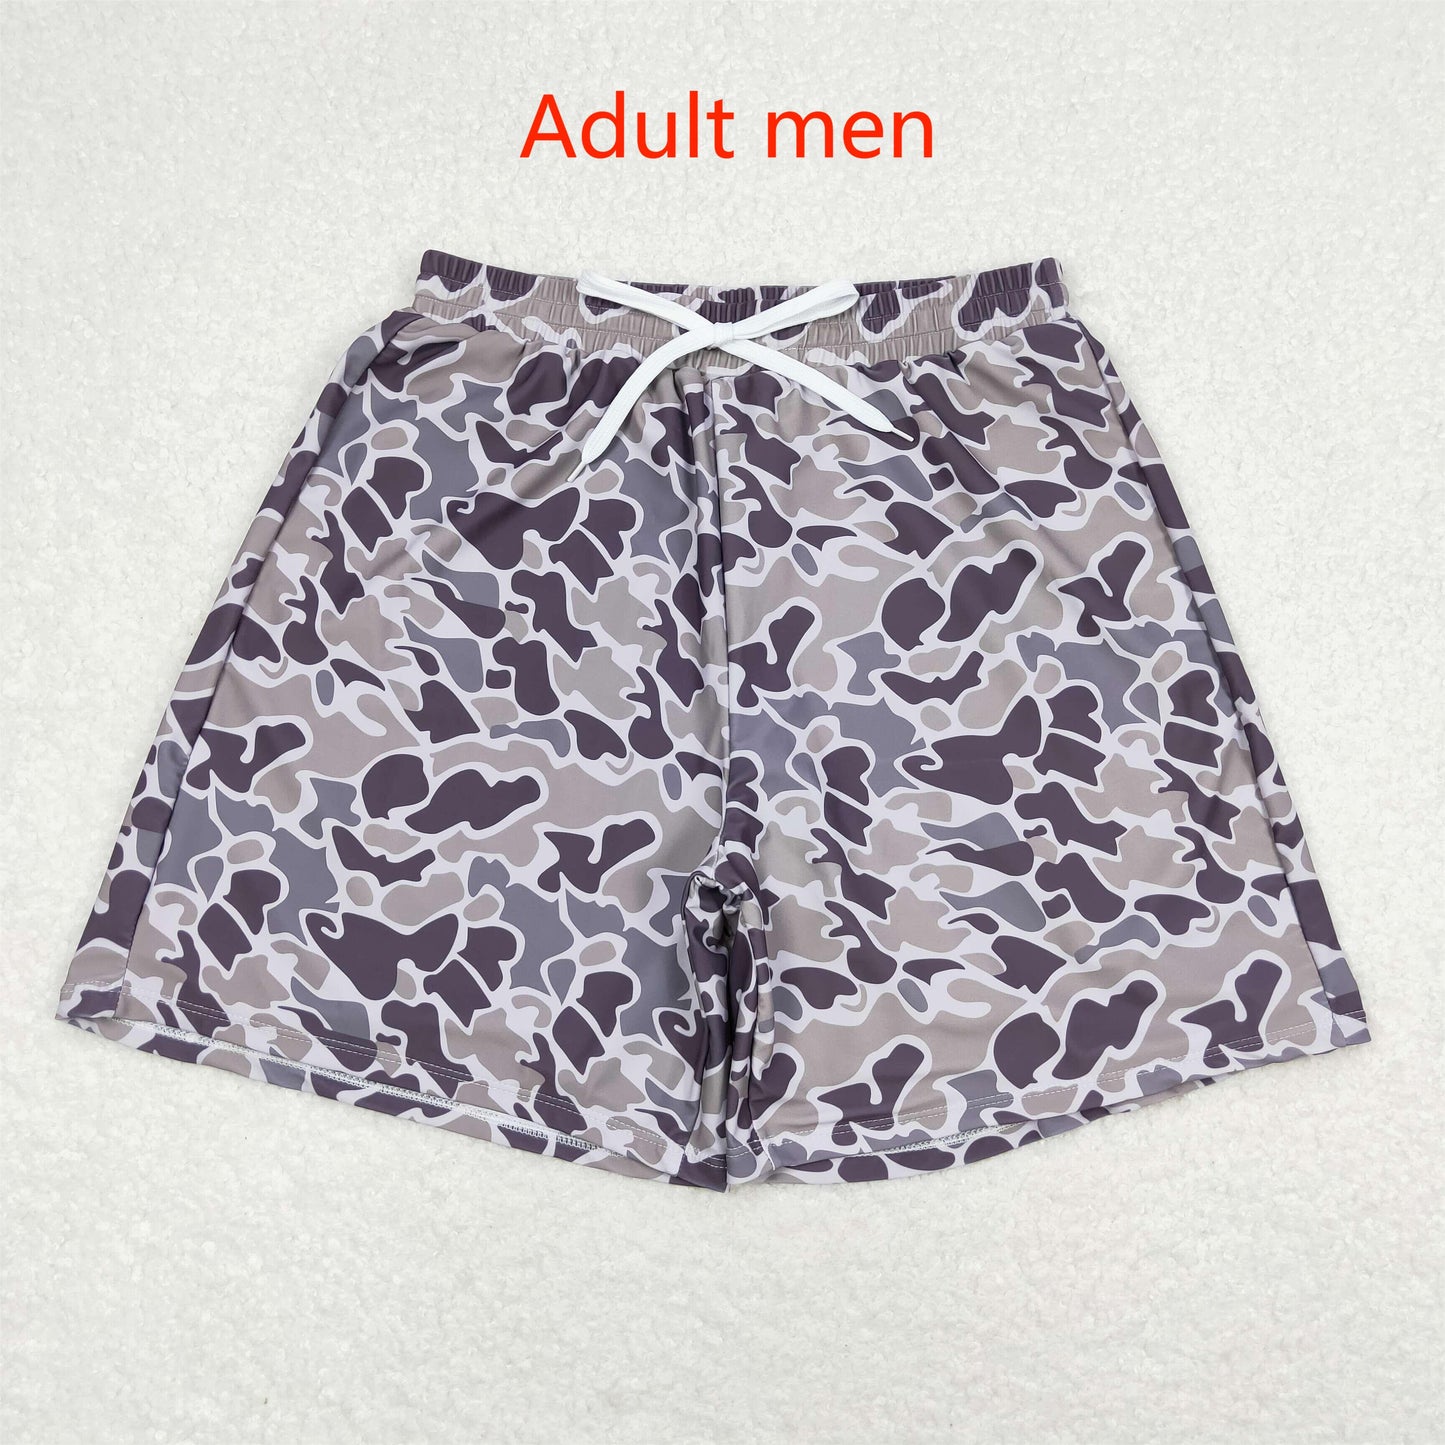 rts no moq S0323 Adult men's camouflage swimming trunks